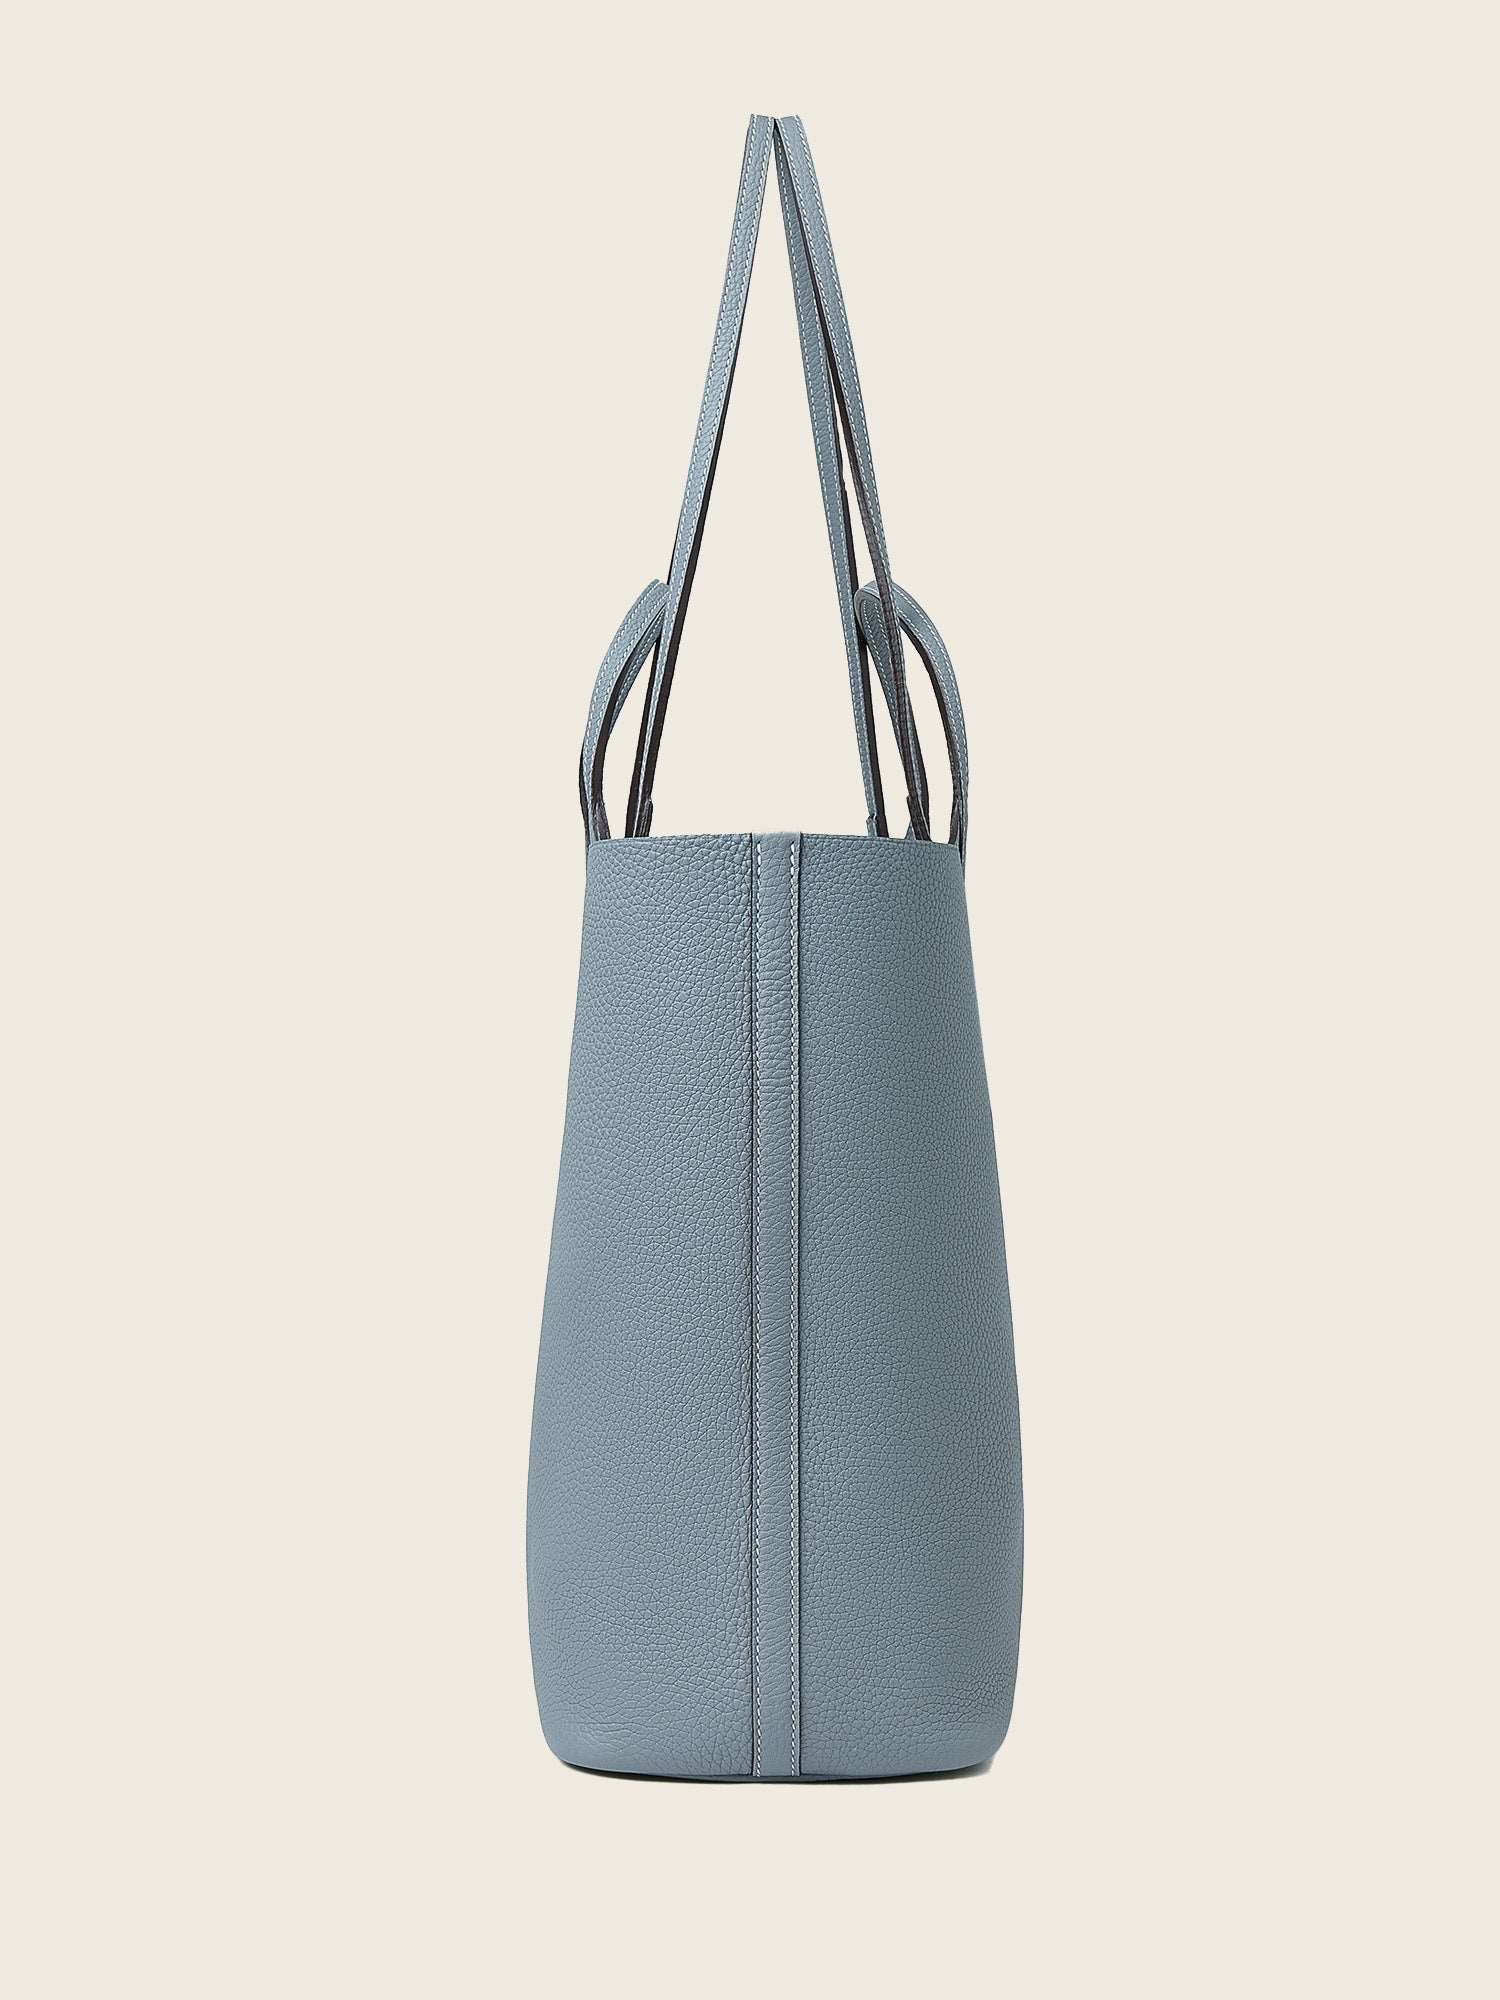 Hpai Large Yesod Tote Bag in Leather - Fog Blue